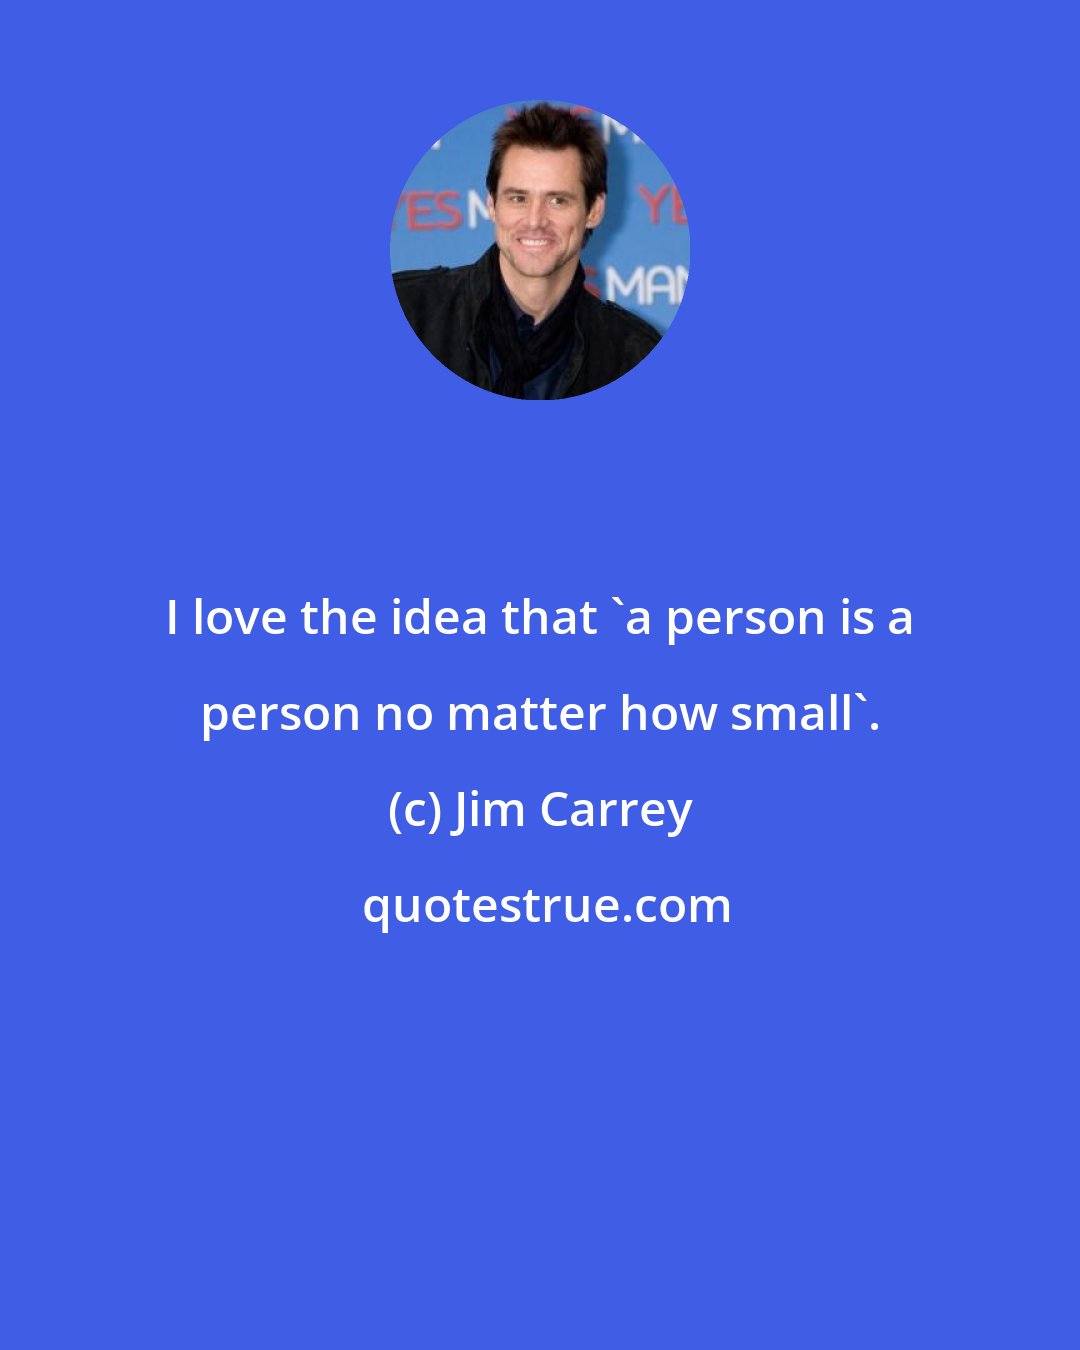 Jim Carrey: I love the idea that 'a person is a person no matter how small'.